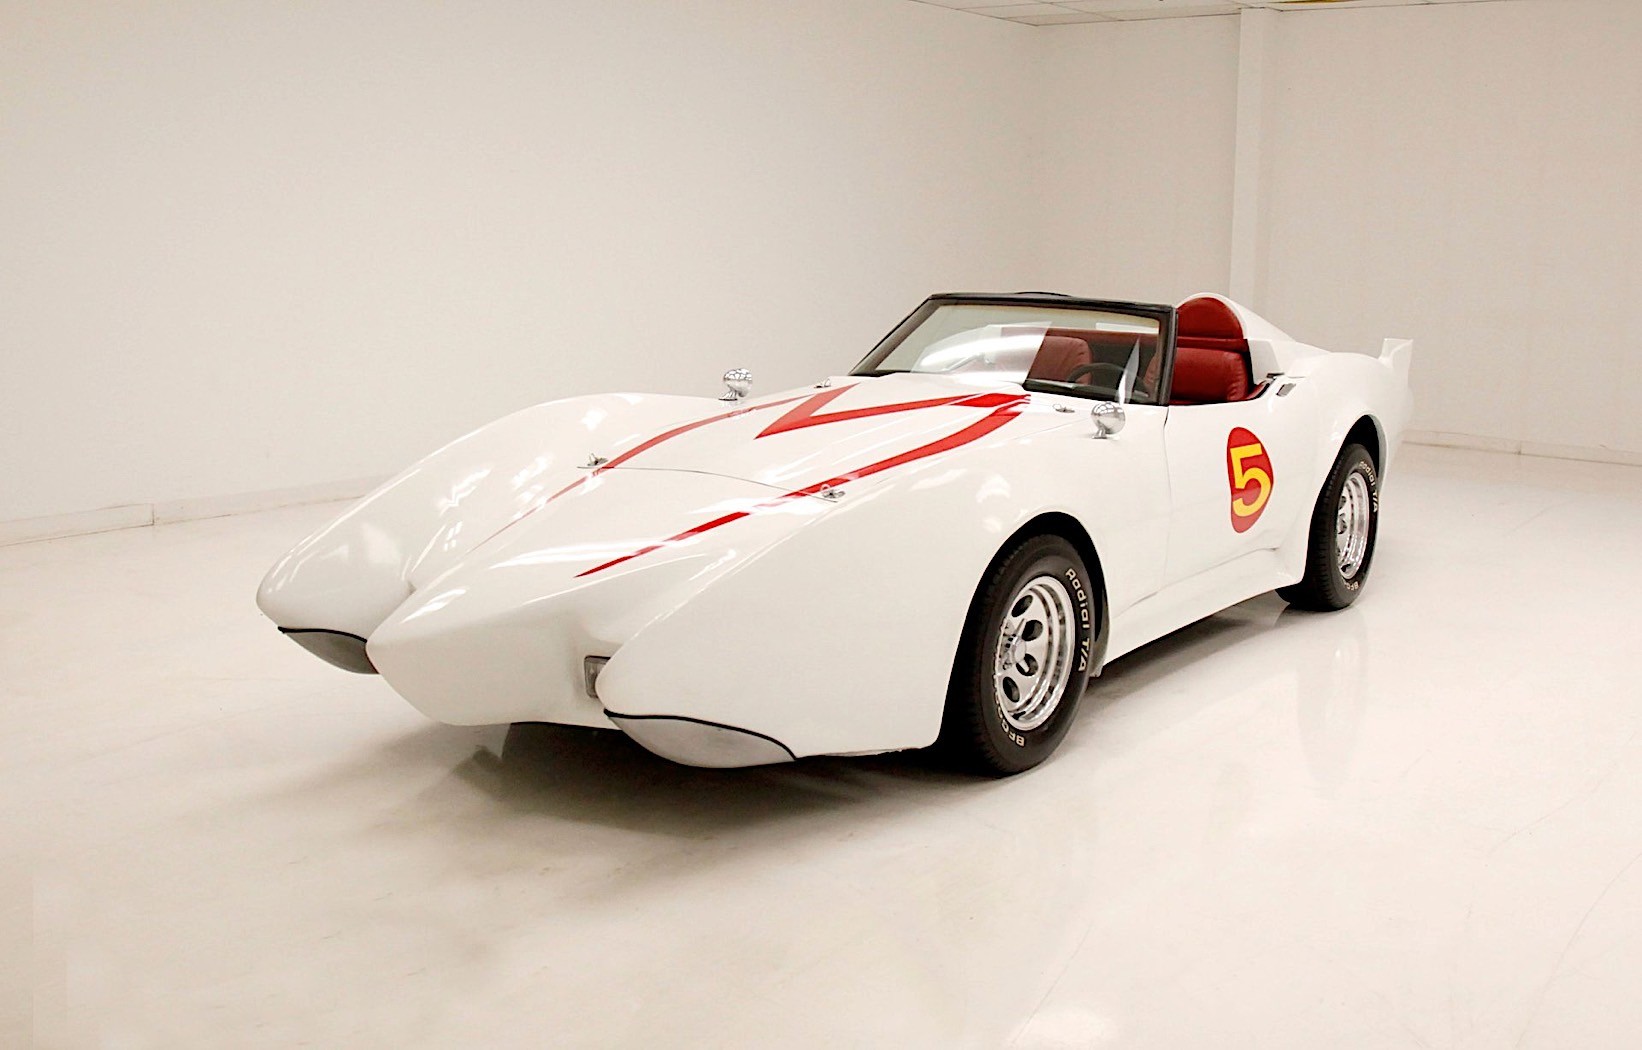 1979-chevy-corvette-mach-5-is-as-close-to-japanese-anime-as-you-get-in-real-life_10.jpg